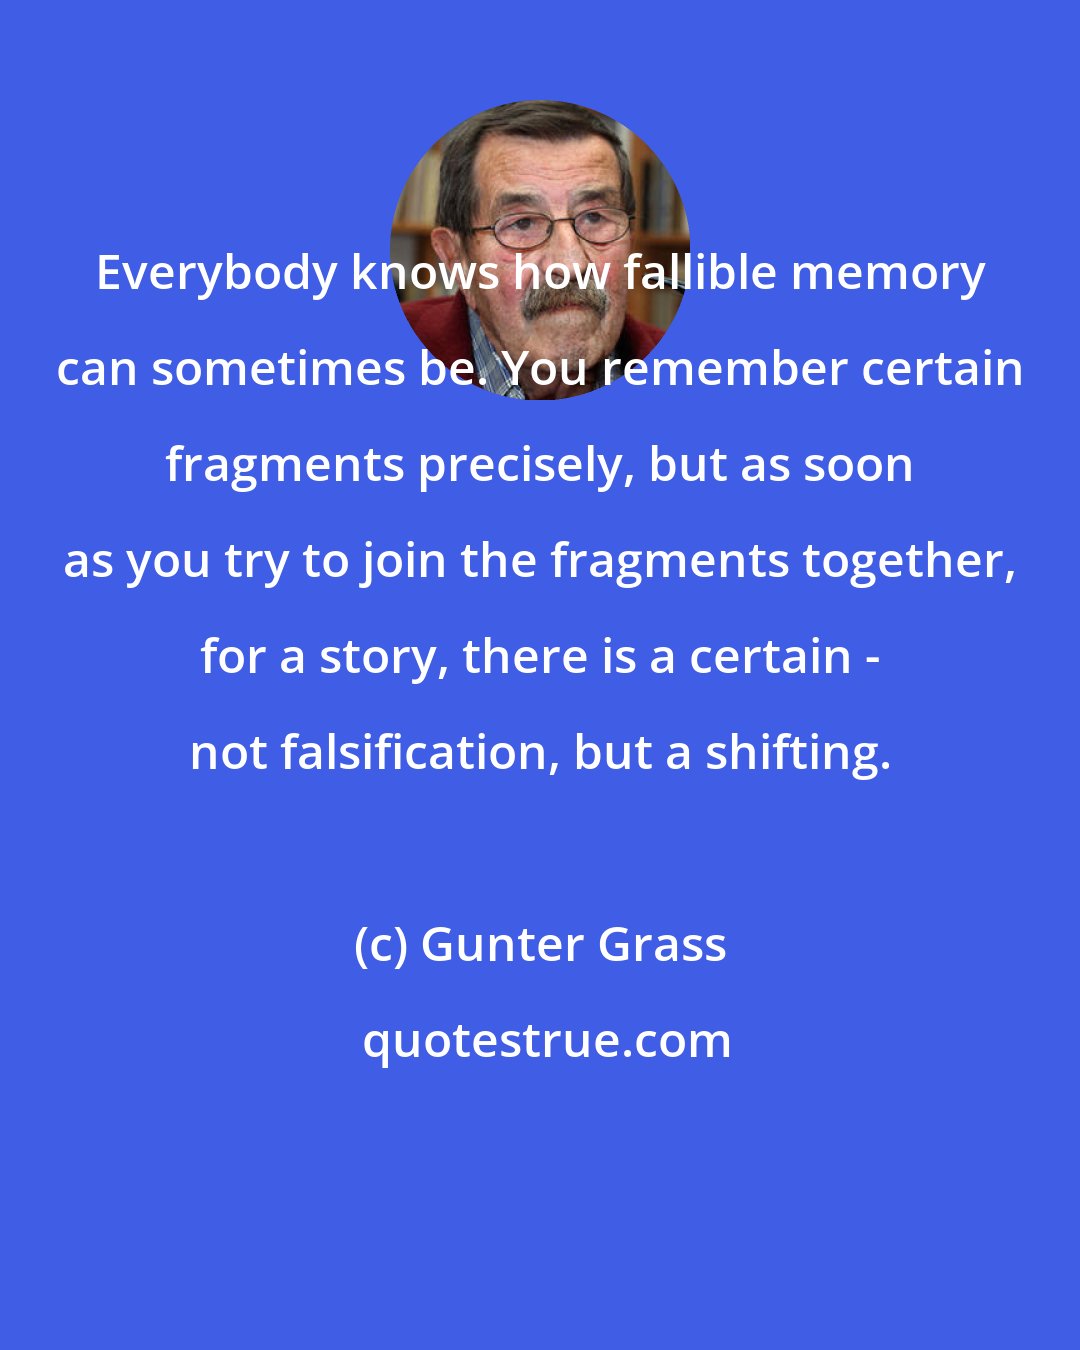 Gunter Grass: Everybody knows how fallible memory can sometimes be. You remember certain fragments precisely, but as soon as you try to join the fragments together, for a story, there is a certain - not falsification, but a shifting.